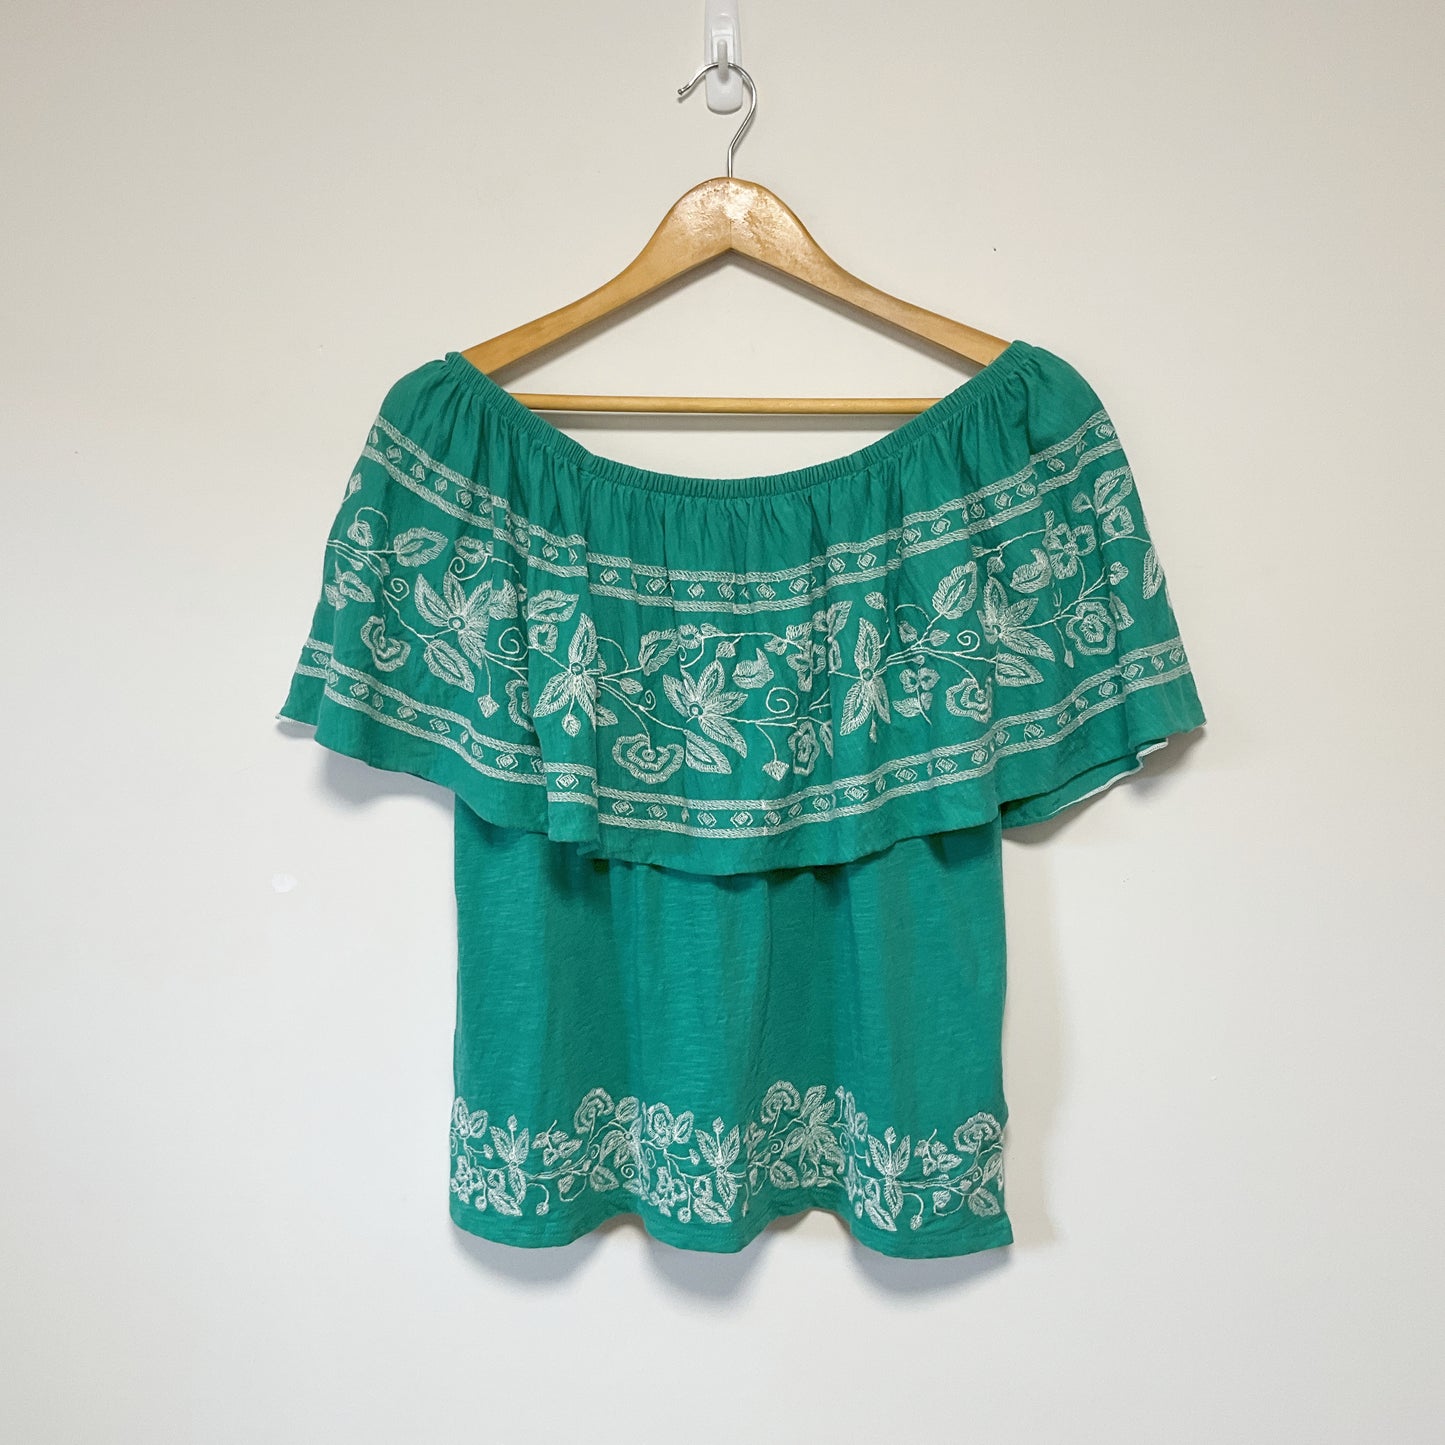 Monsoon - Floral Embroidered Top